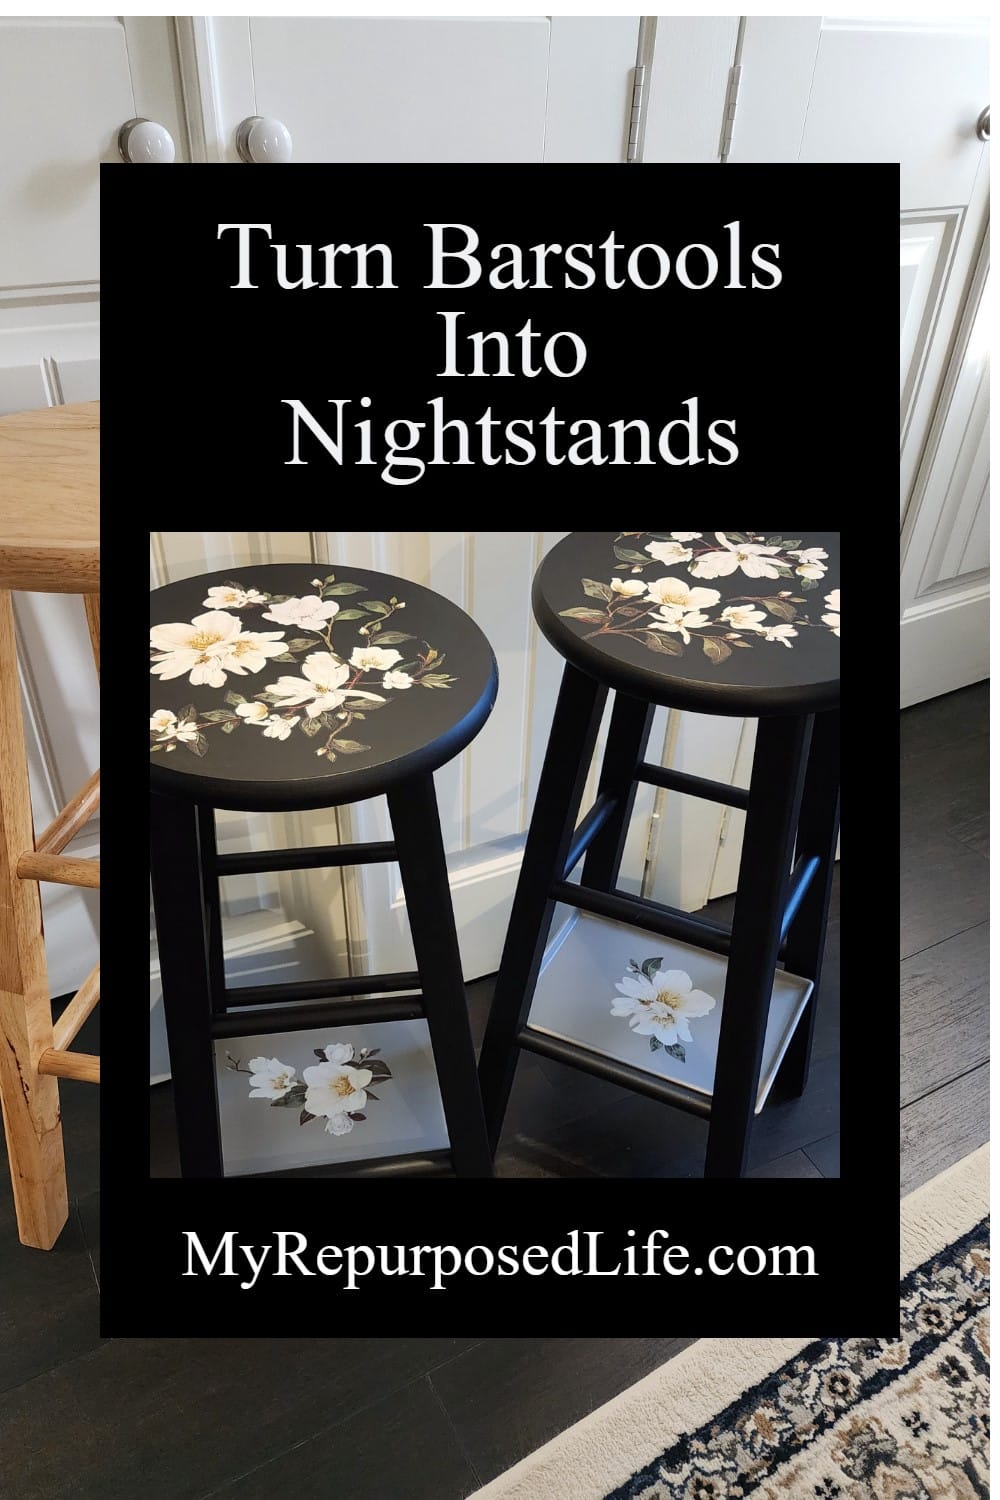 Create space for nightstands in a Queen-sized bed by upcycling bar stools. Learn how to transform bar stools into nightstands! via @repurposedlife